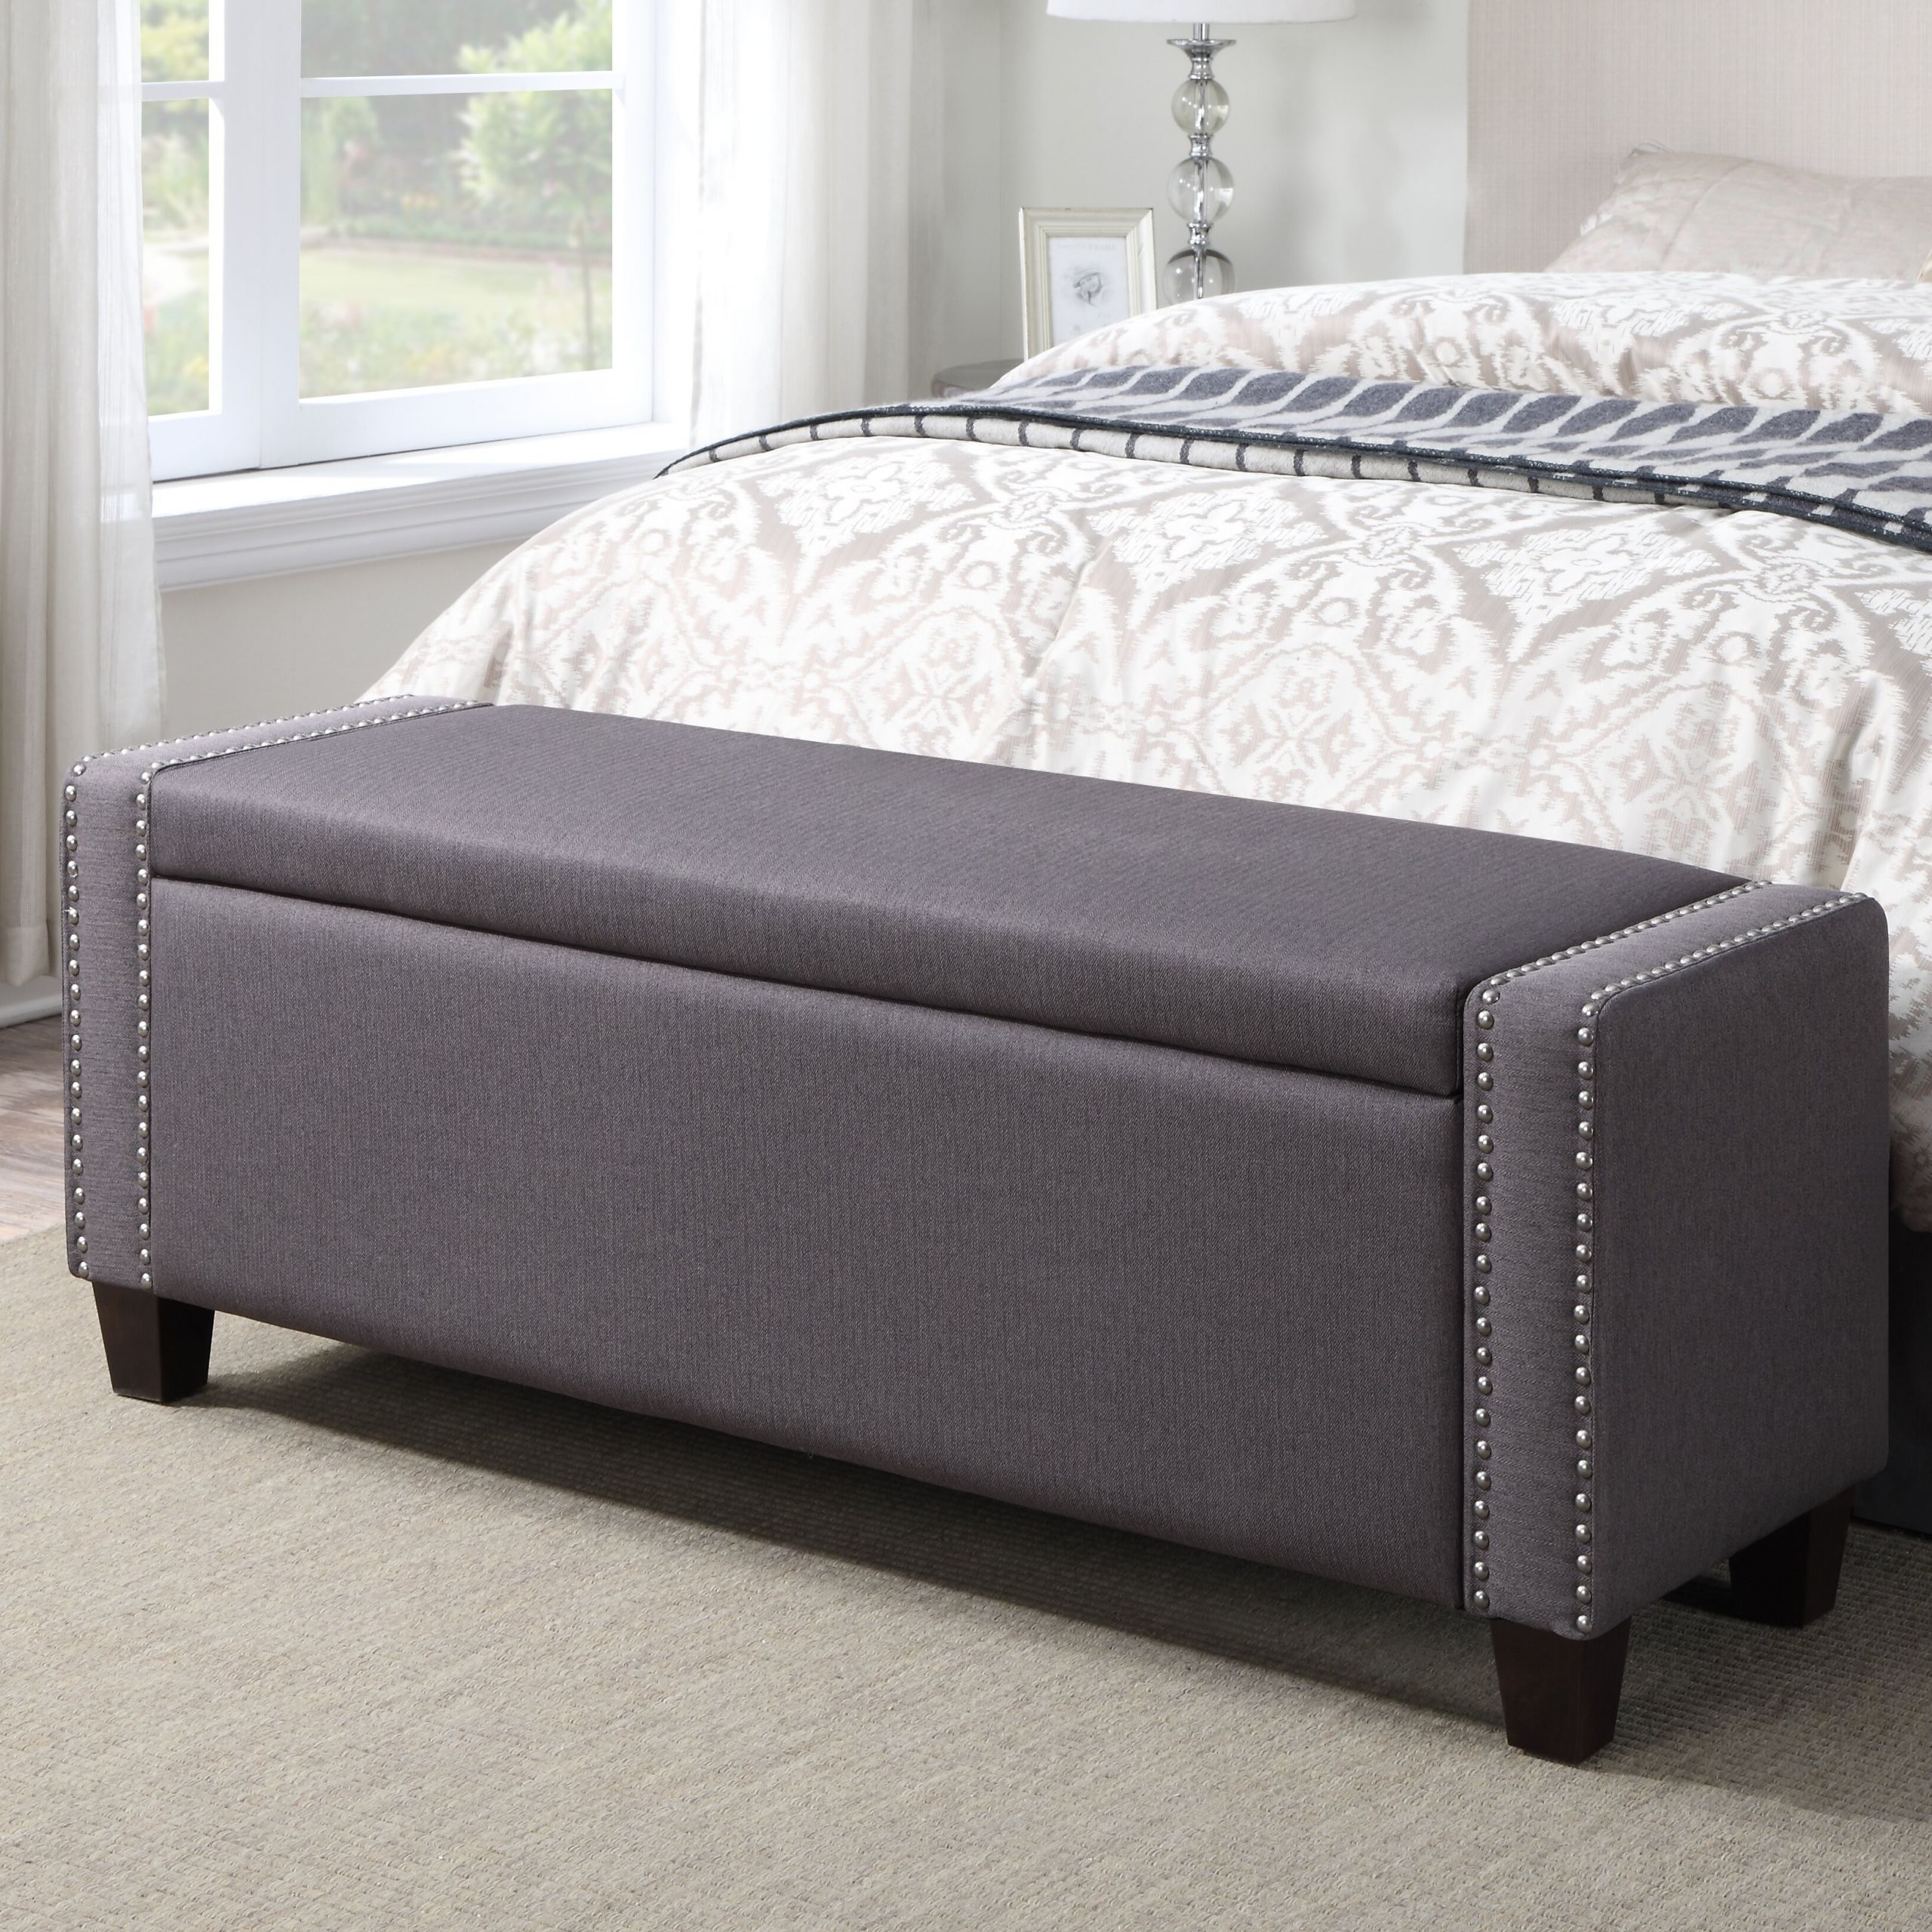 How An Upholstered Bench Can Transform Your Bedroom